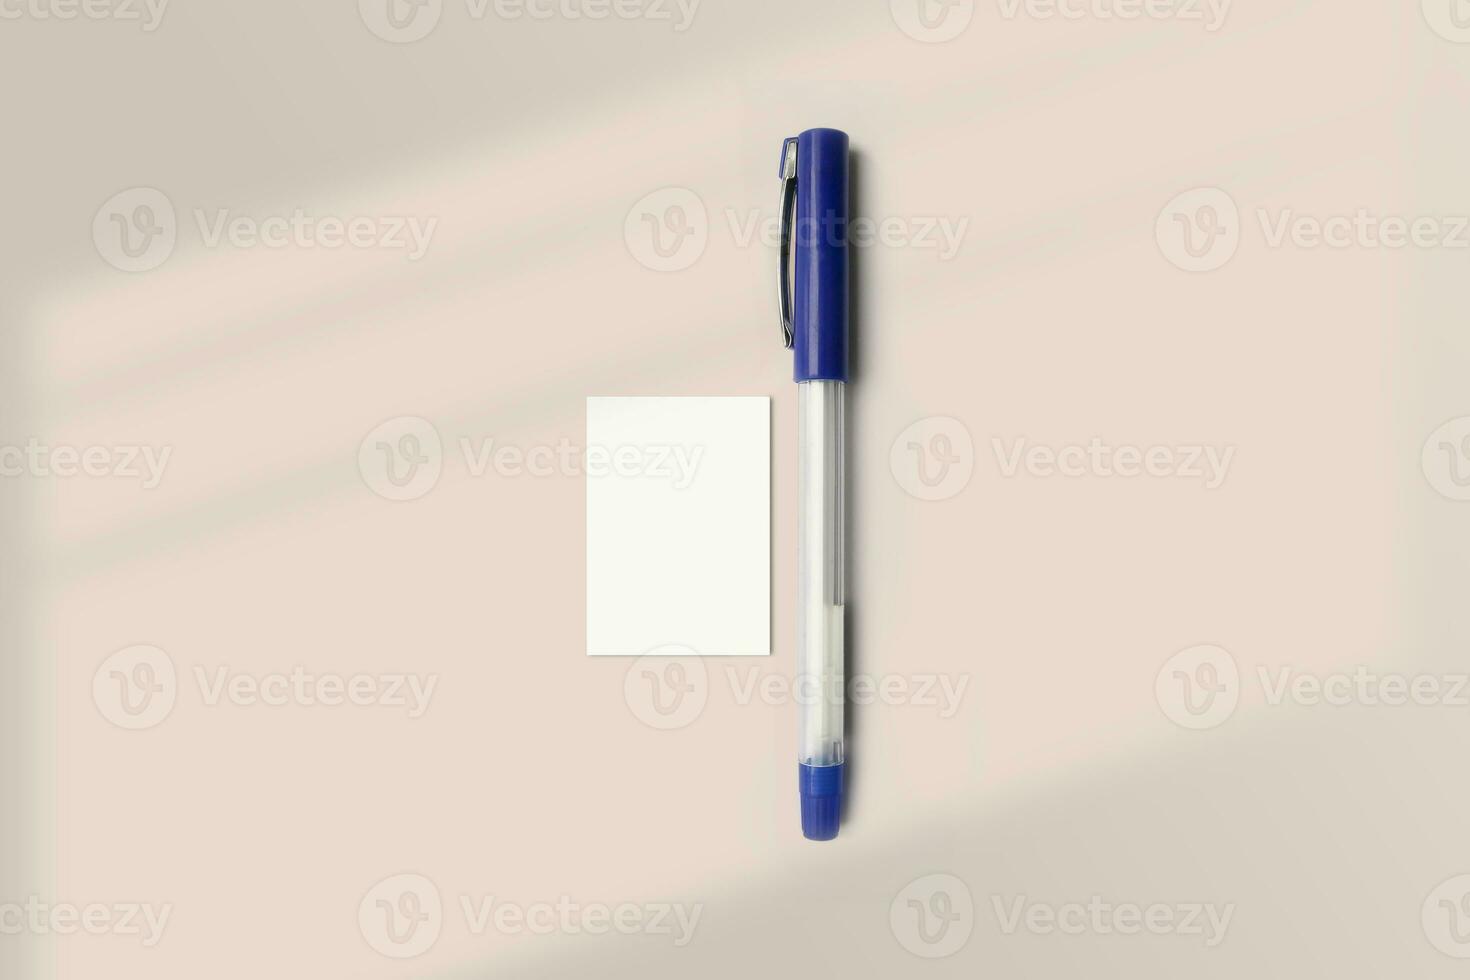 Realistic A9 paper flatlay mockup with a pen. Portrait A9 International Paper Size mockup top view. Simple, clean, modern, minimal super small paper mock up flat lay concept photo